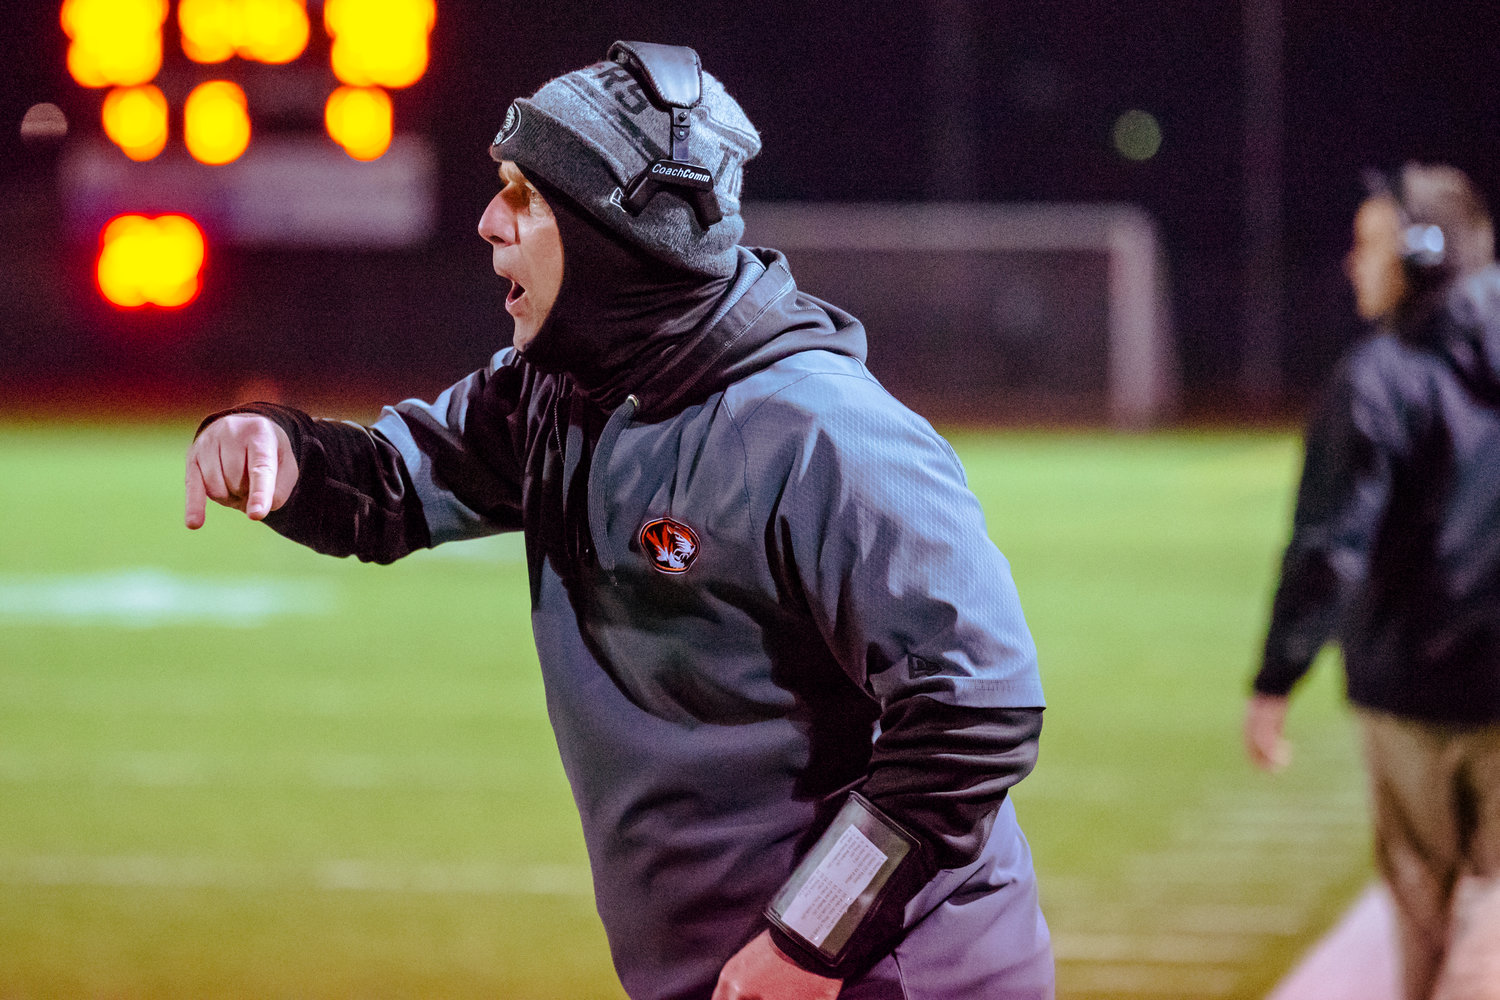 Napavine's coach yells to players on the field during a game against Onalaska Saturday night at Tiger Stadium.